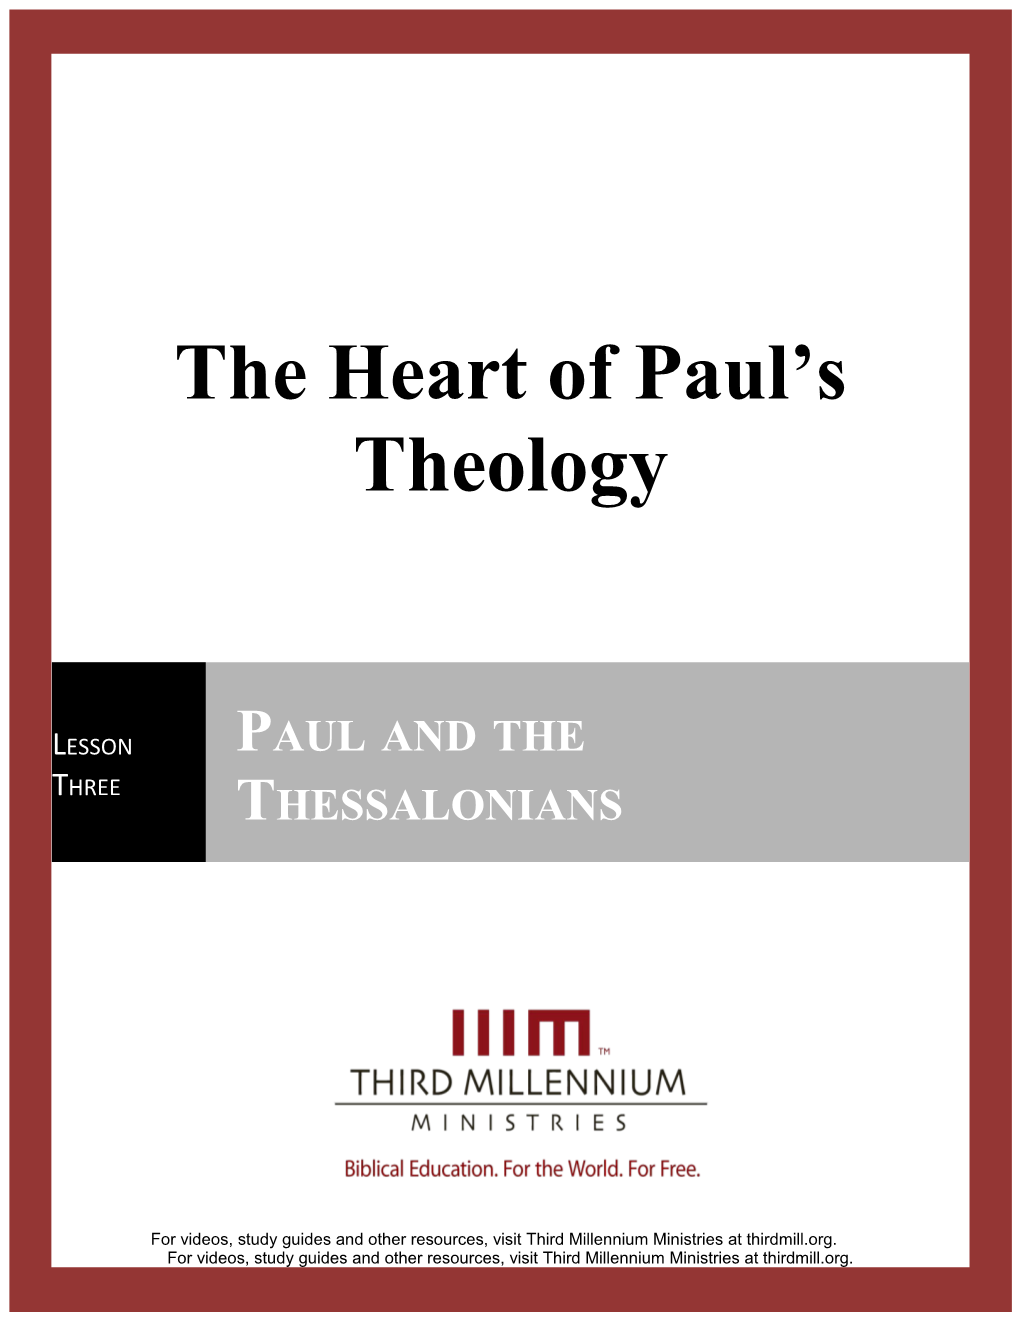 The Heart of Paul's Theology, Lesson 3